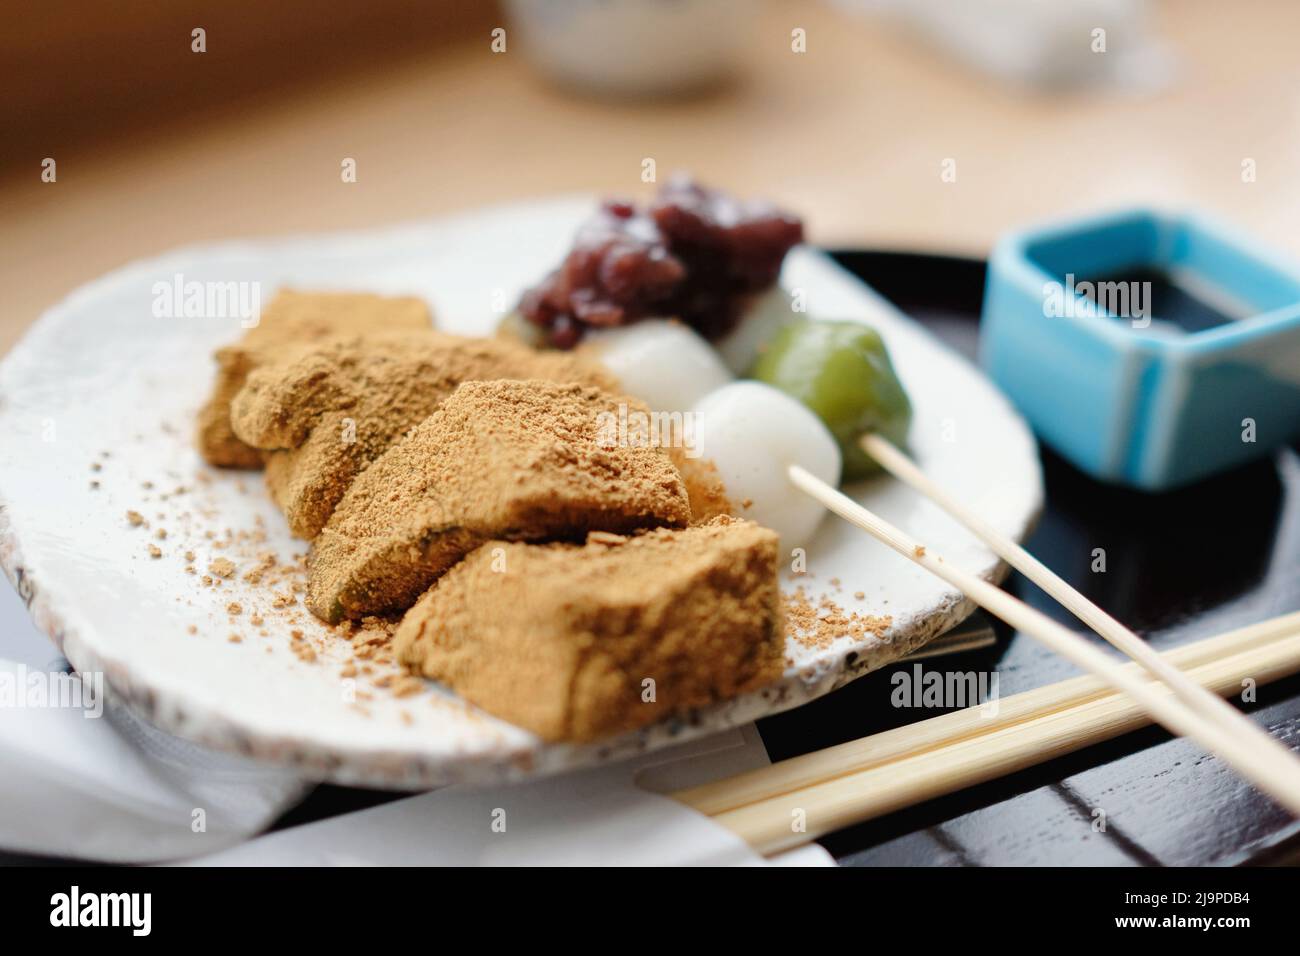 A plate of assorted traditional Japanese rice cake desserts: dango skewers topped with adzuki (red bean) paste and bean powder-coated warabi mochi. Stock Photo